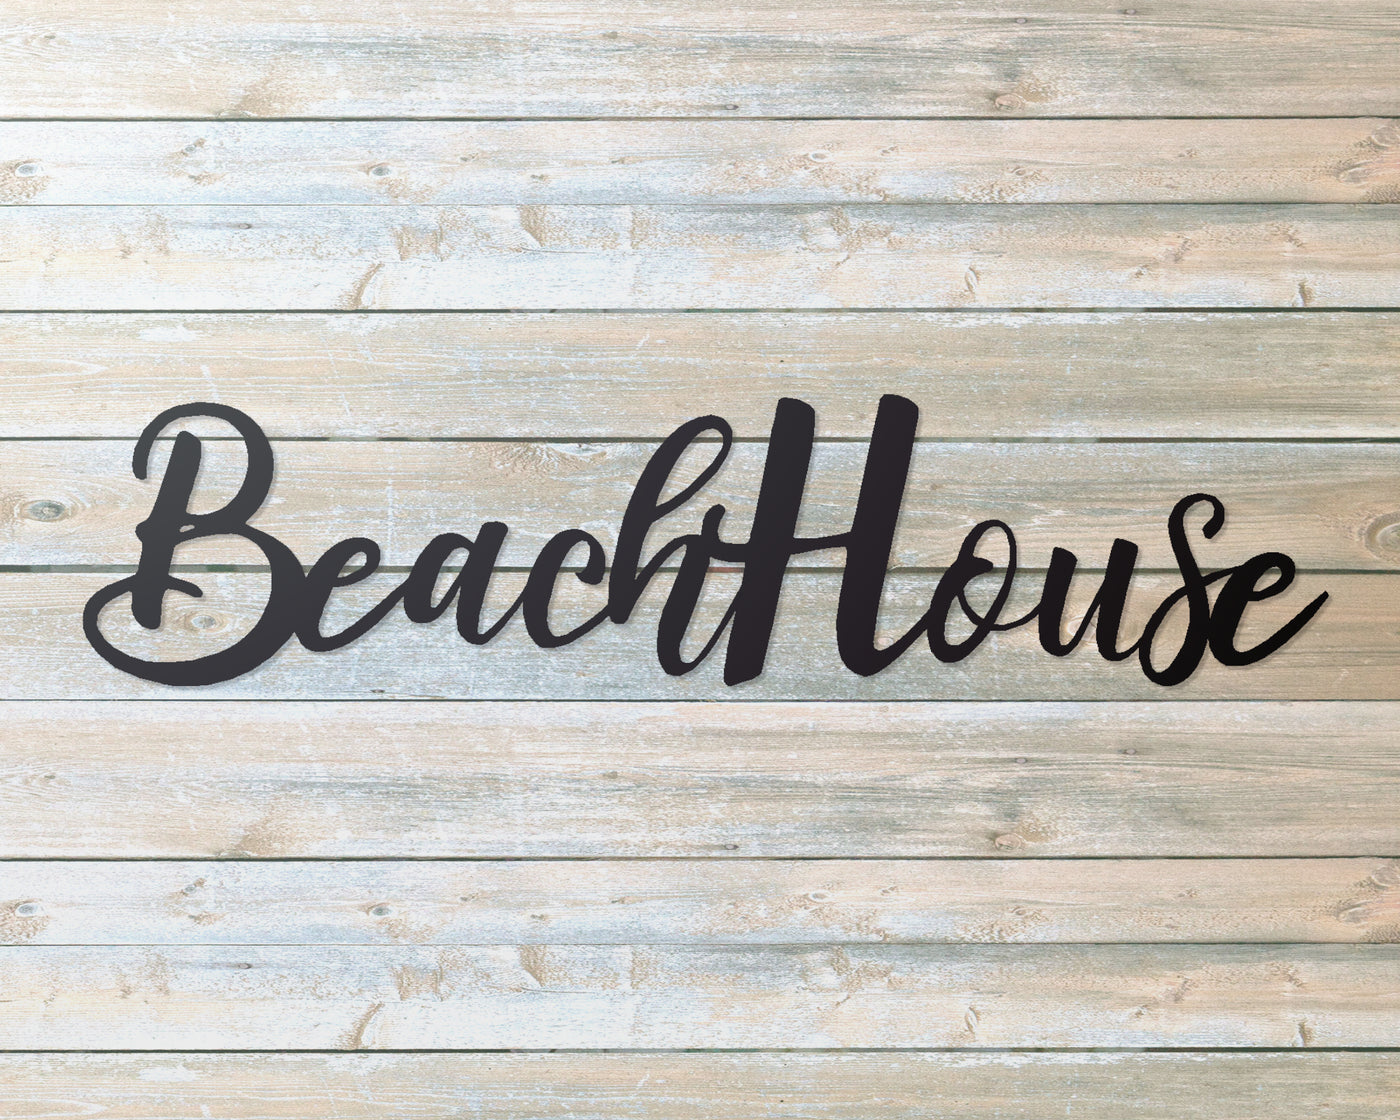 Beach House Metal Word Sign - Madison Iron and Wood - Metal Art - metal outdoor decor - Steel deocrations - american made products - veteran owned business products - fencing decorations - fencing supplies - custom wall decorations - personalized wall signs - steel - decorative post caps - steel post caps - metal post caps - brackets - structural brackets - home improvement - easter - easter decorations - easter gift - easter yard decor